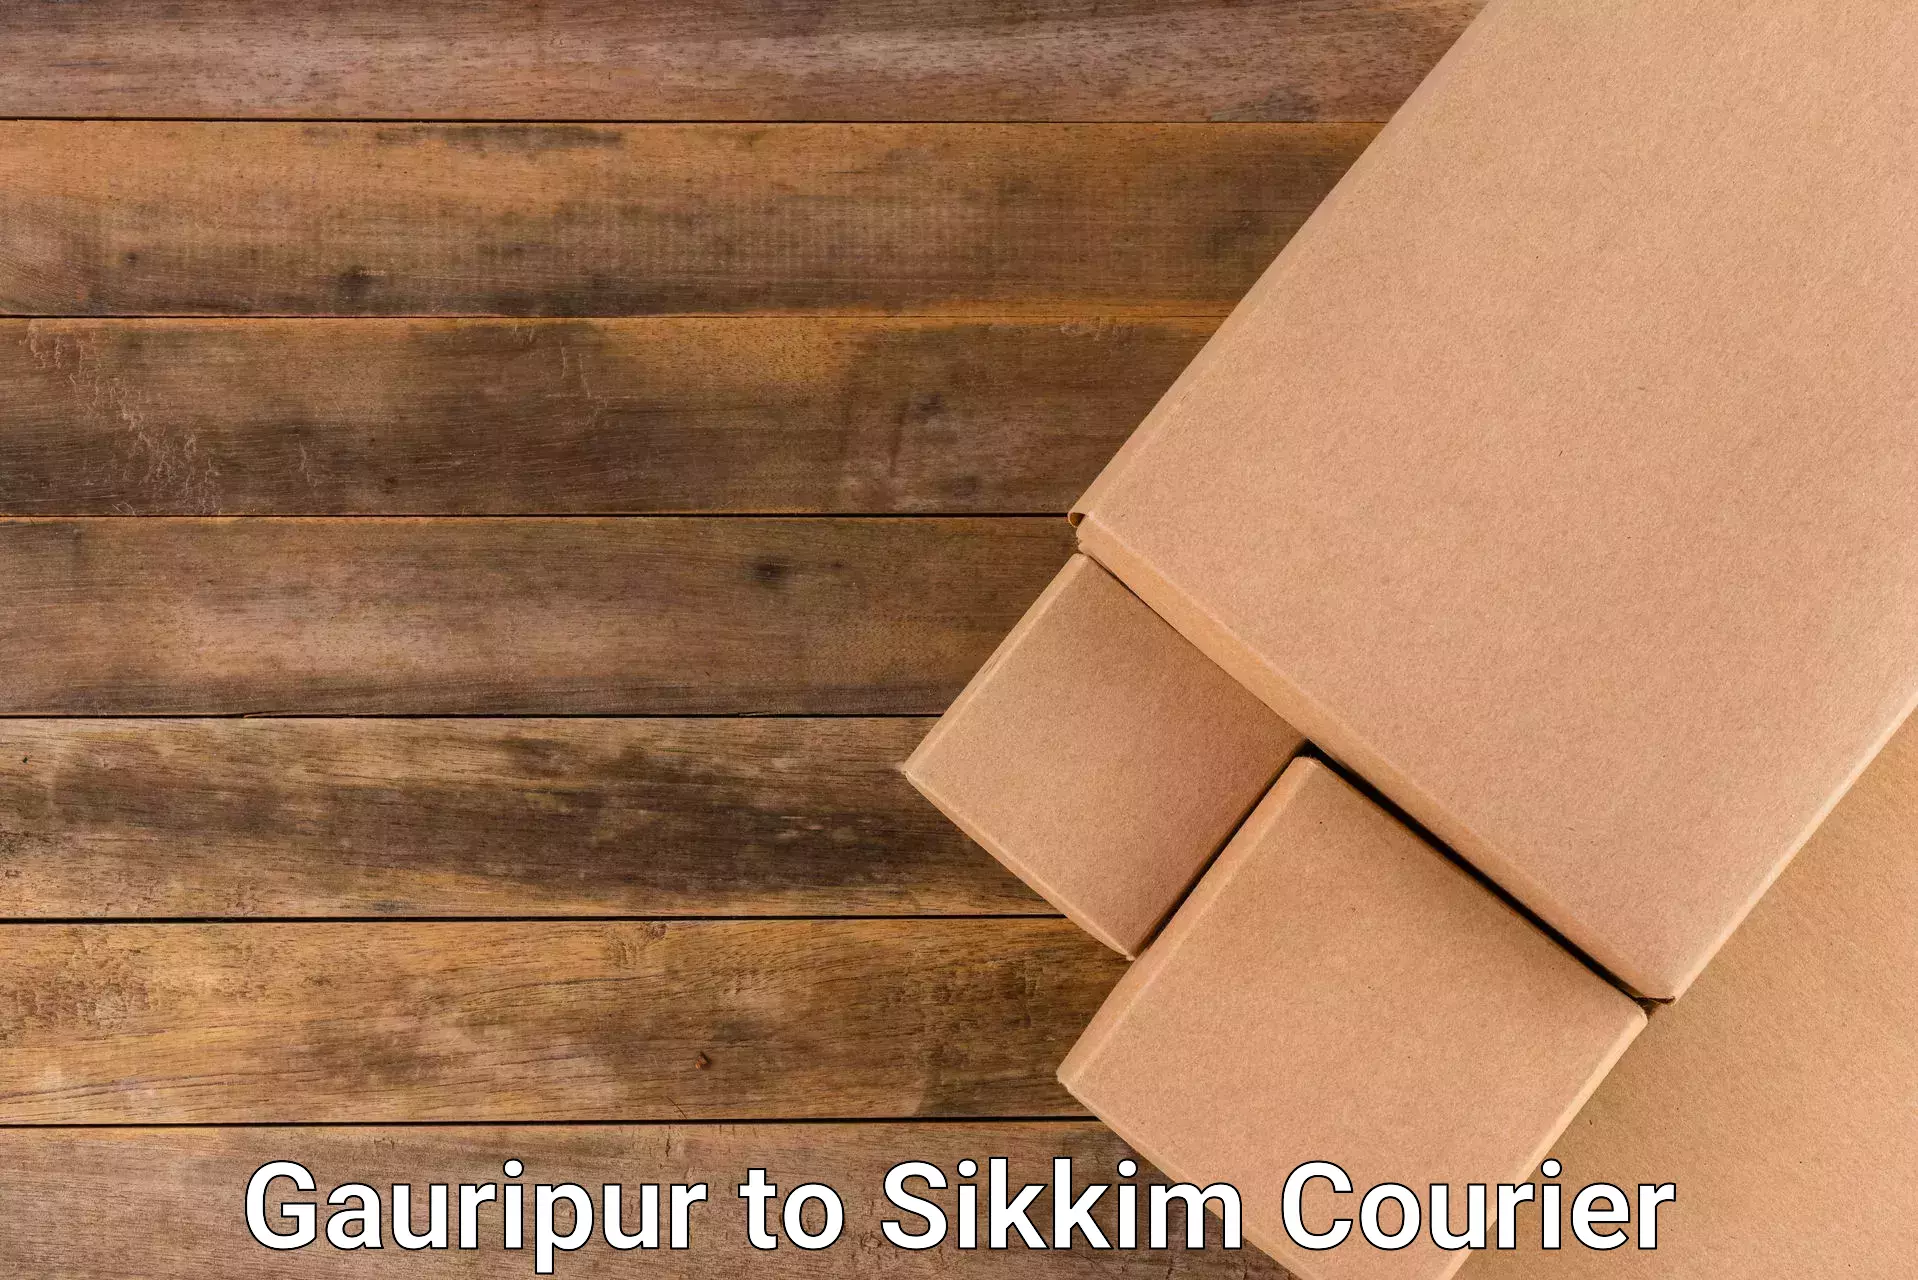 Advanced tracking systems in Gauripur to South Sikkim